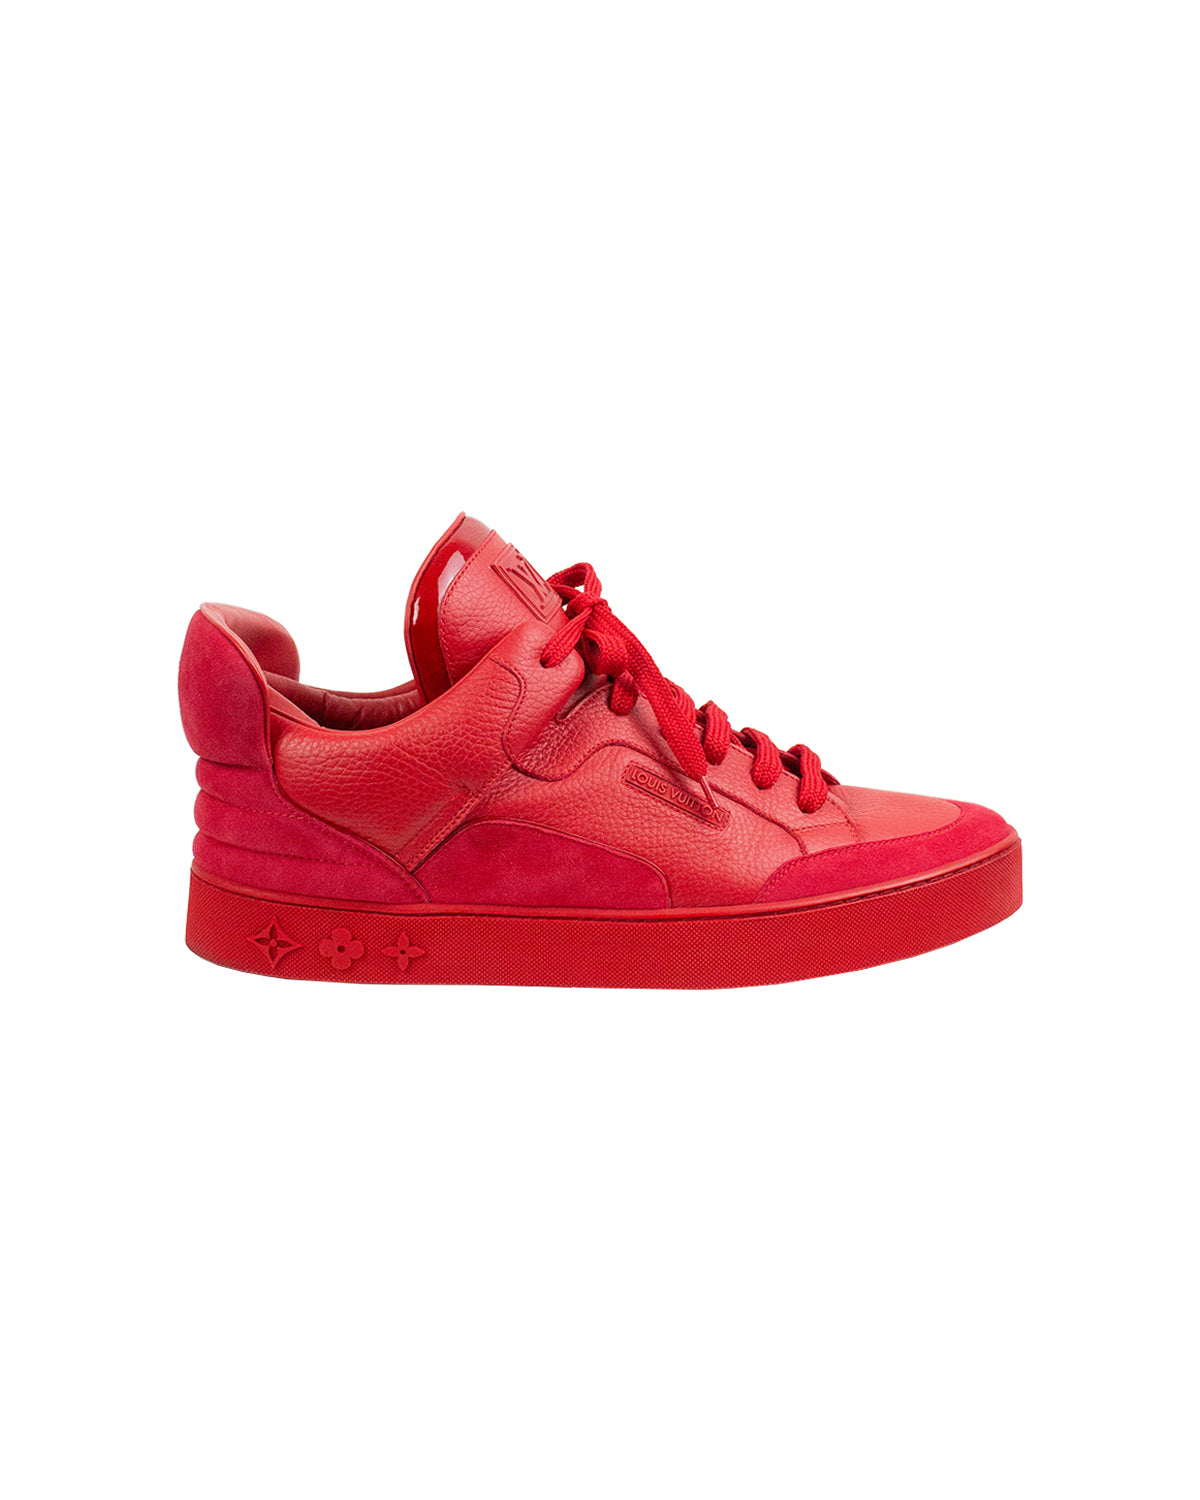 Kanye x Louis Vuitton Don, Deadstock, Red size